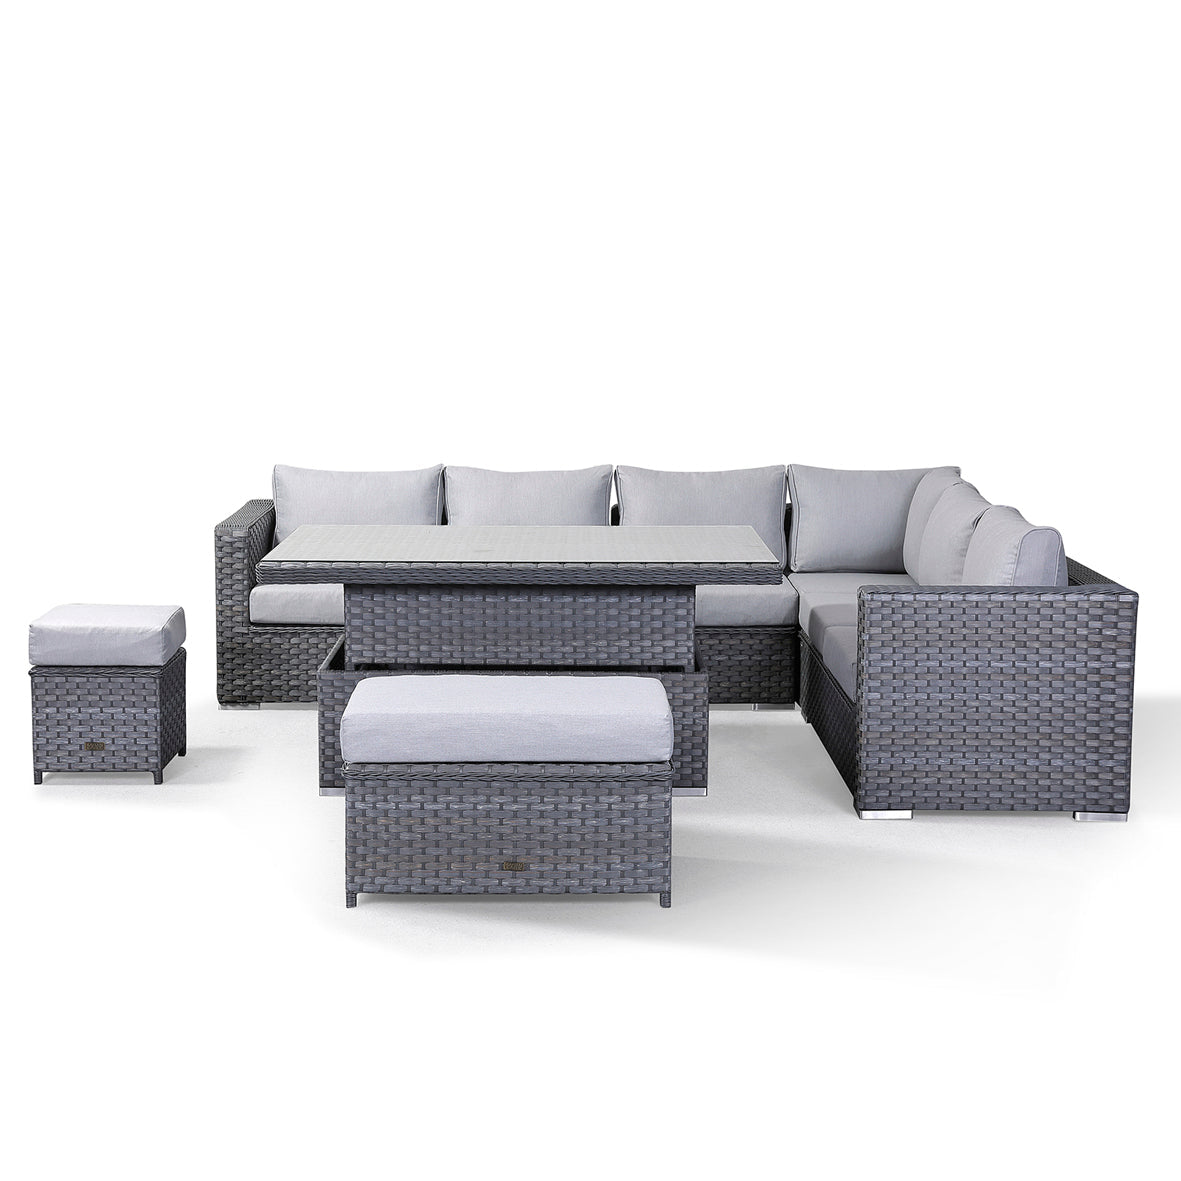 Rattan park Catalina Aluminium Range Modular Corner Sofa Set with Rising Table in Slate Grey Weave With Free Round White Fire Pit